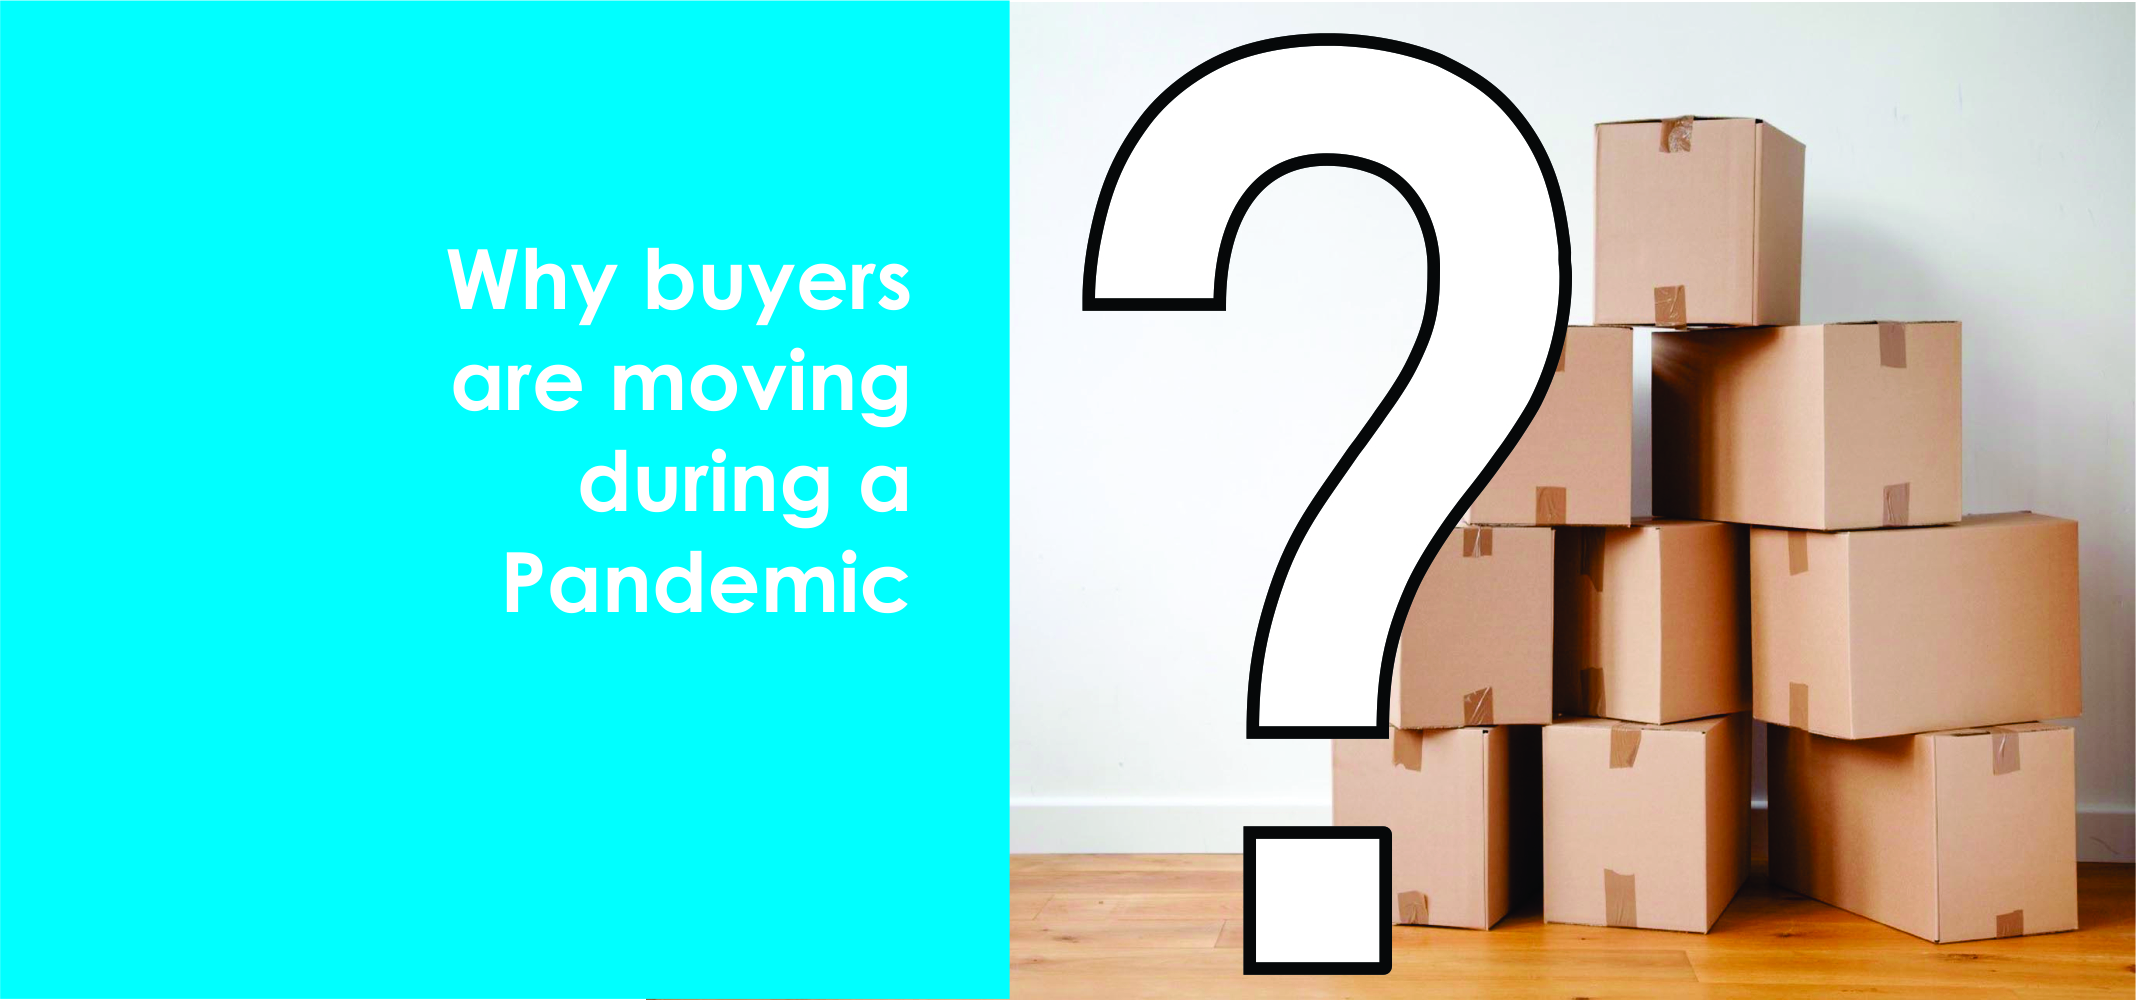 Why buyers are moving during a pandemic